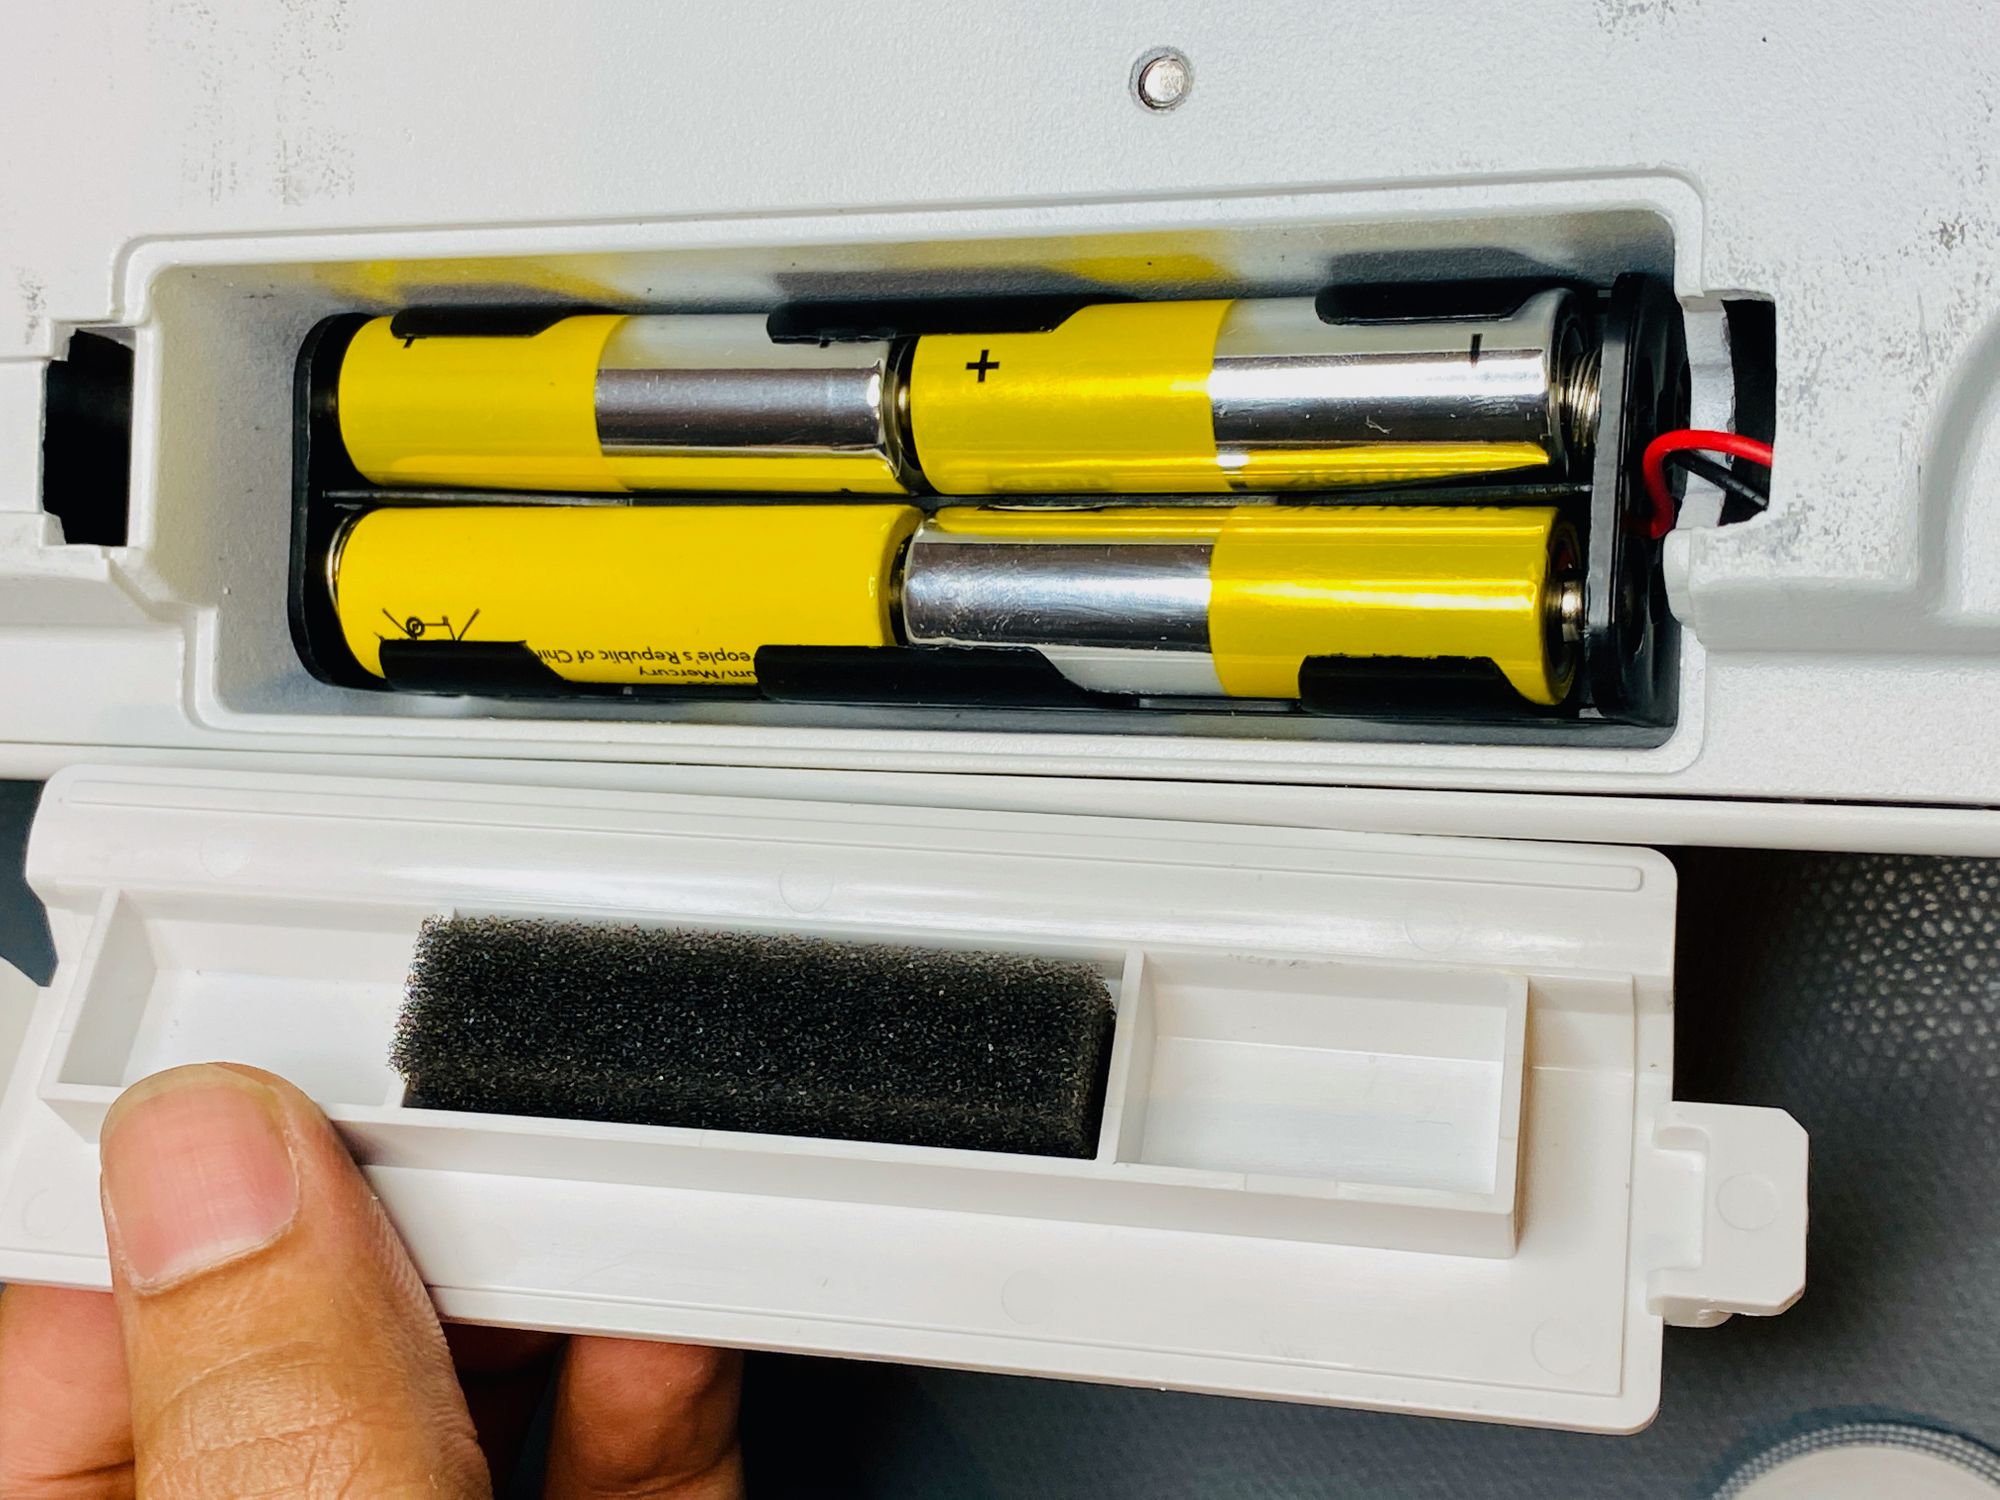 Battery compartment.